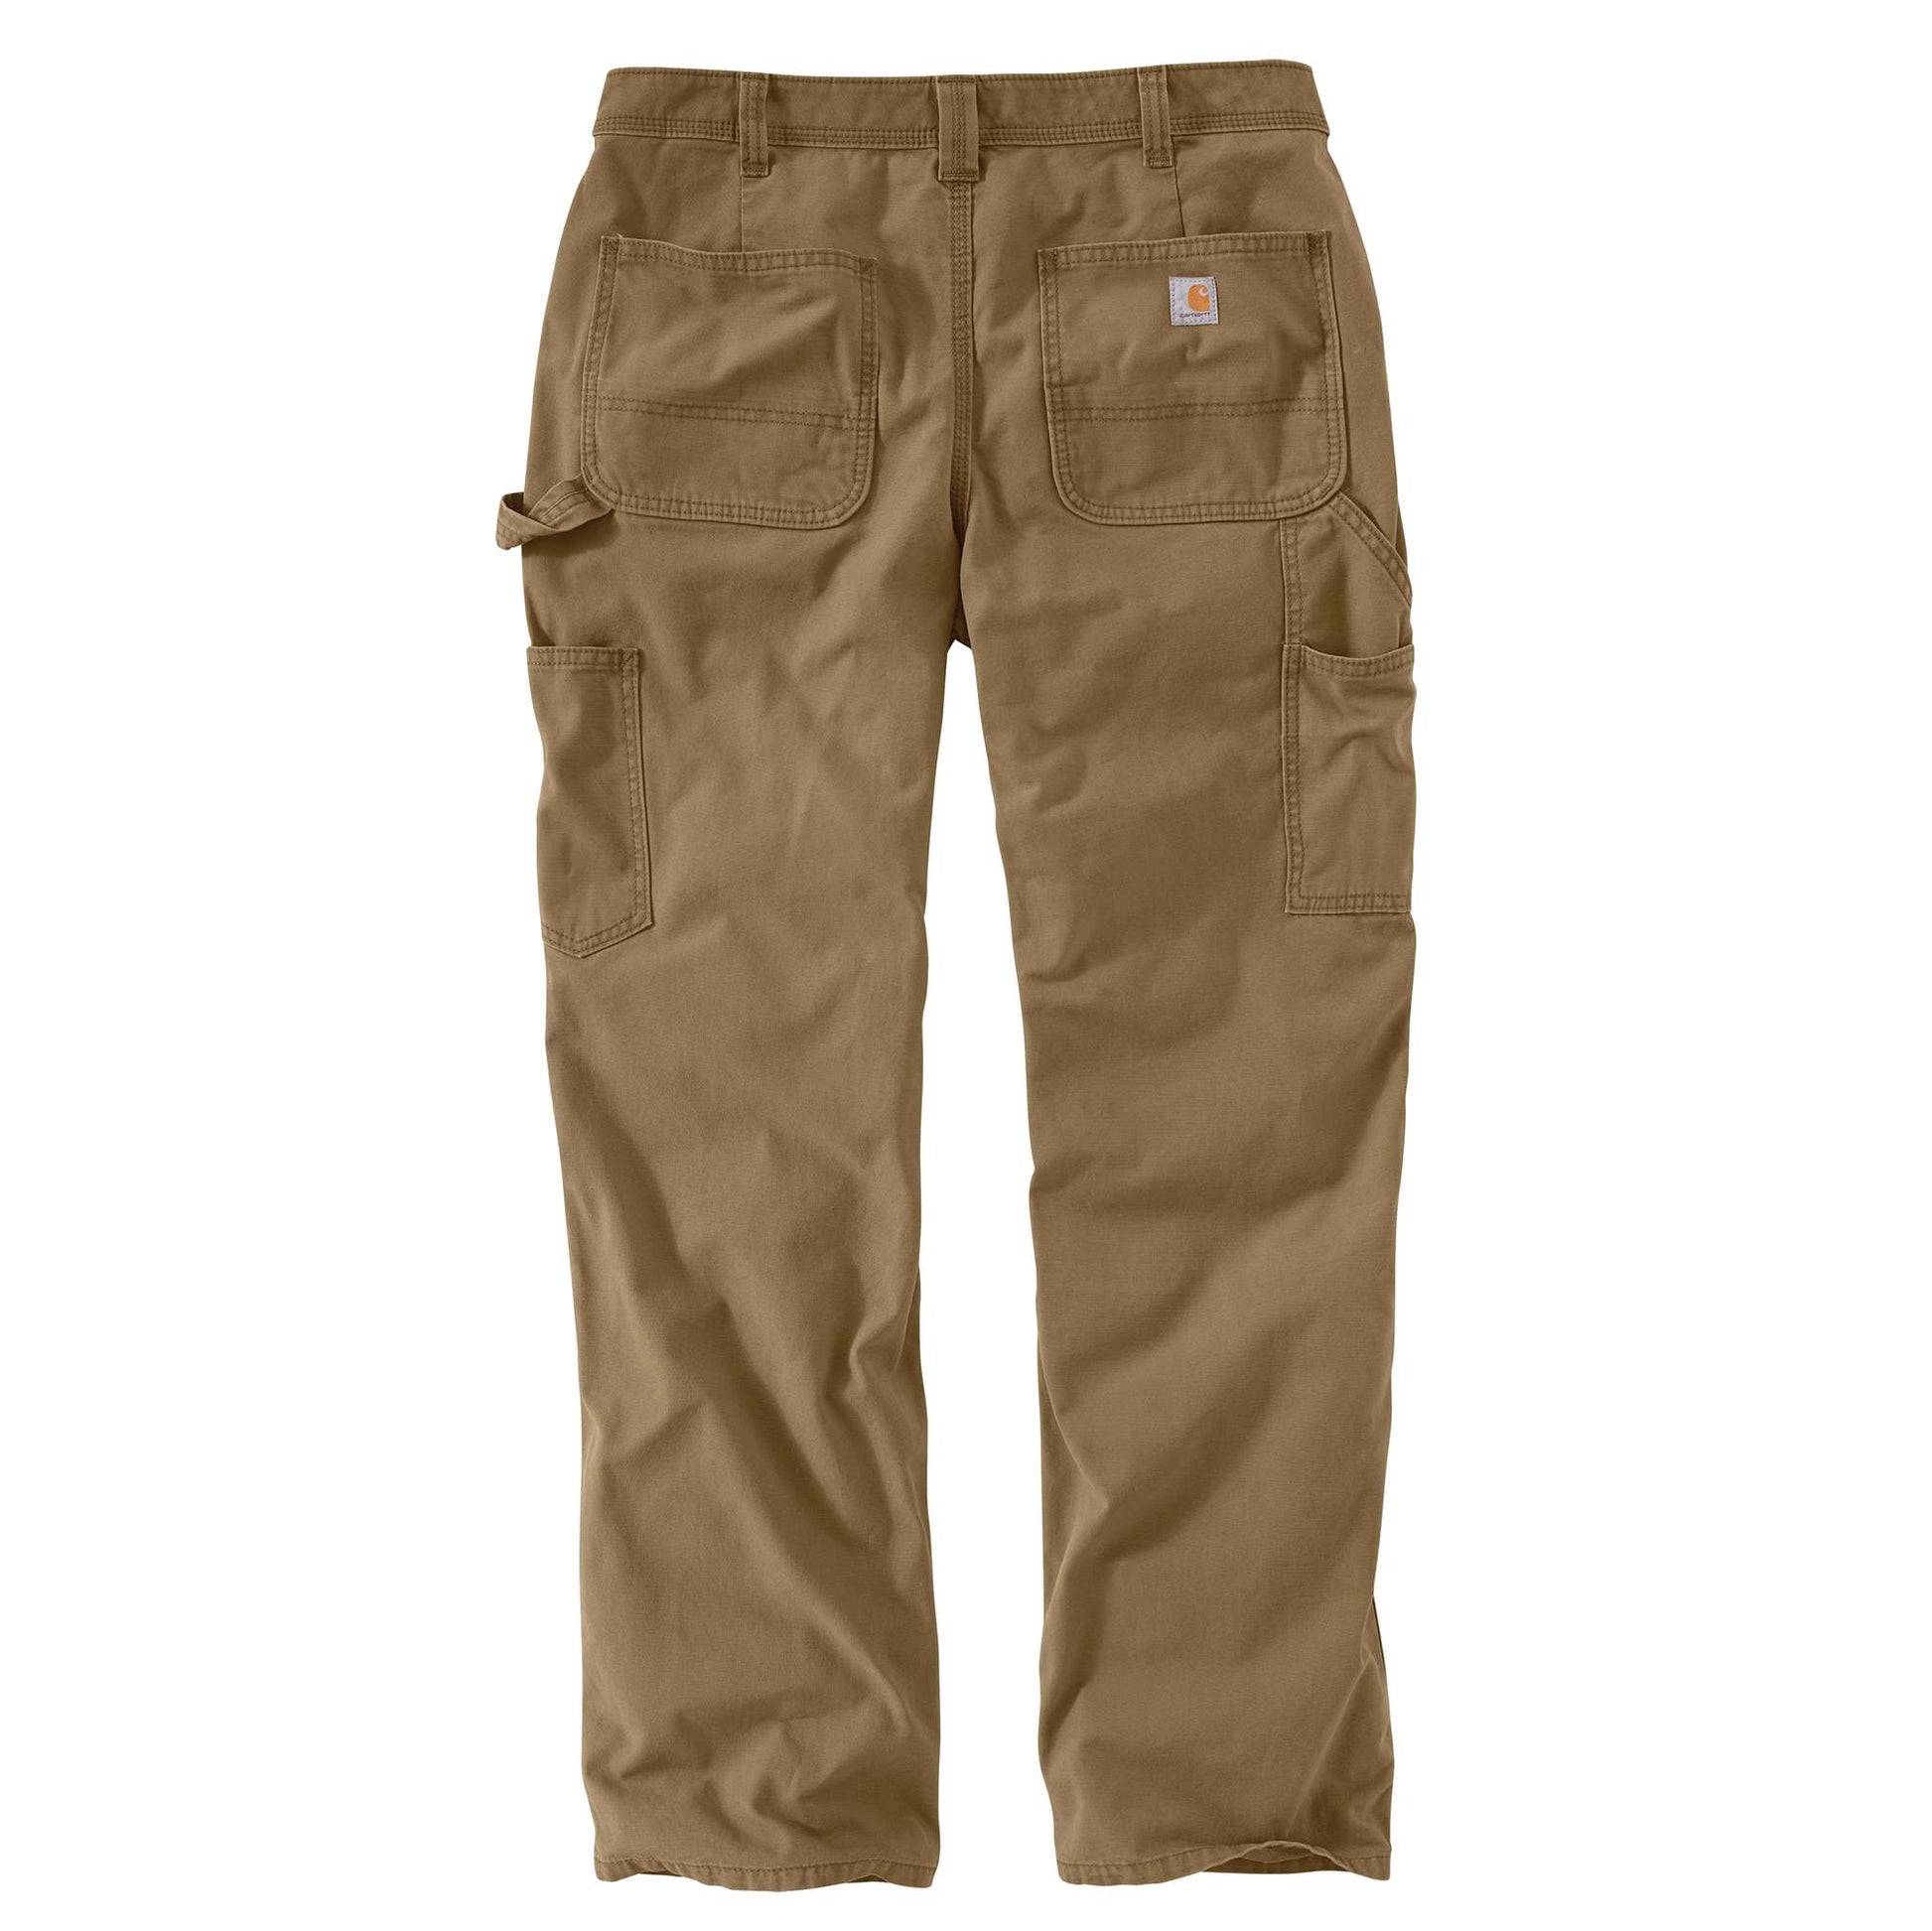  Carhartt womens Rugged Flex Loose Fit Canvas Double-front Work  (Plus Sizes) Pants, Dark Brown, 18 Tall US: Clothing, Shoes & Jewelry